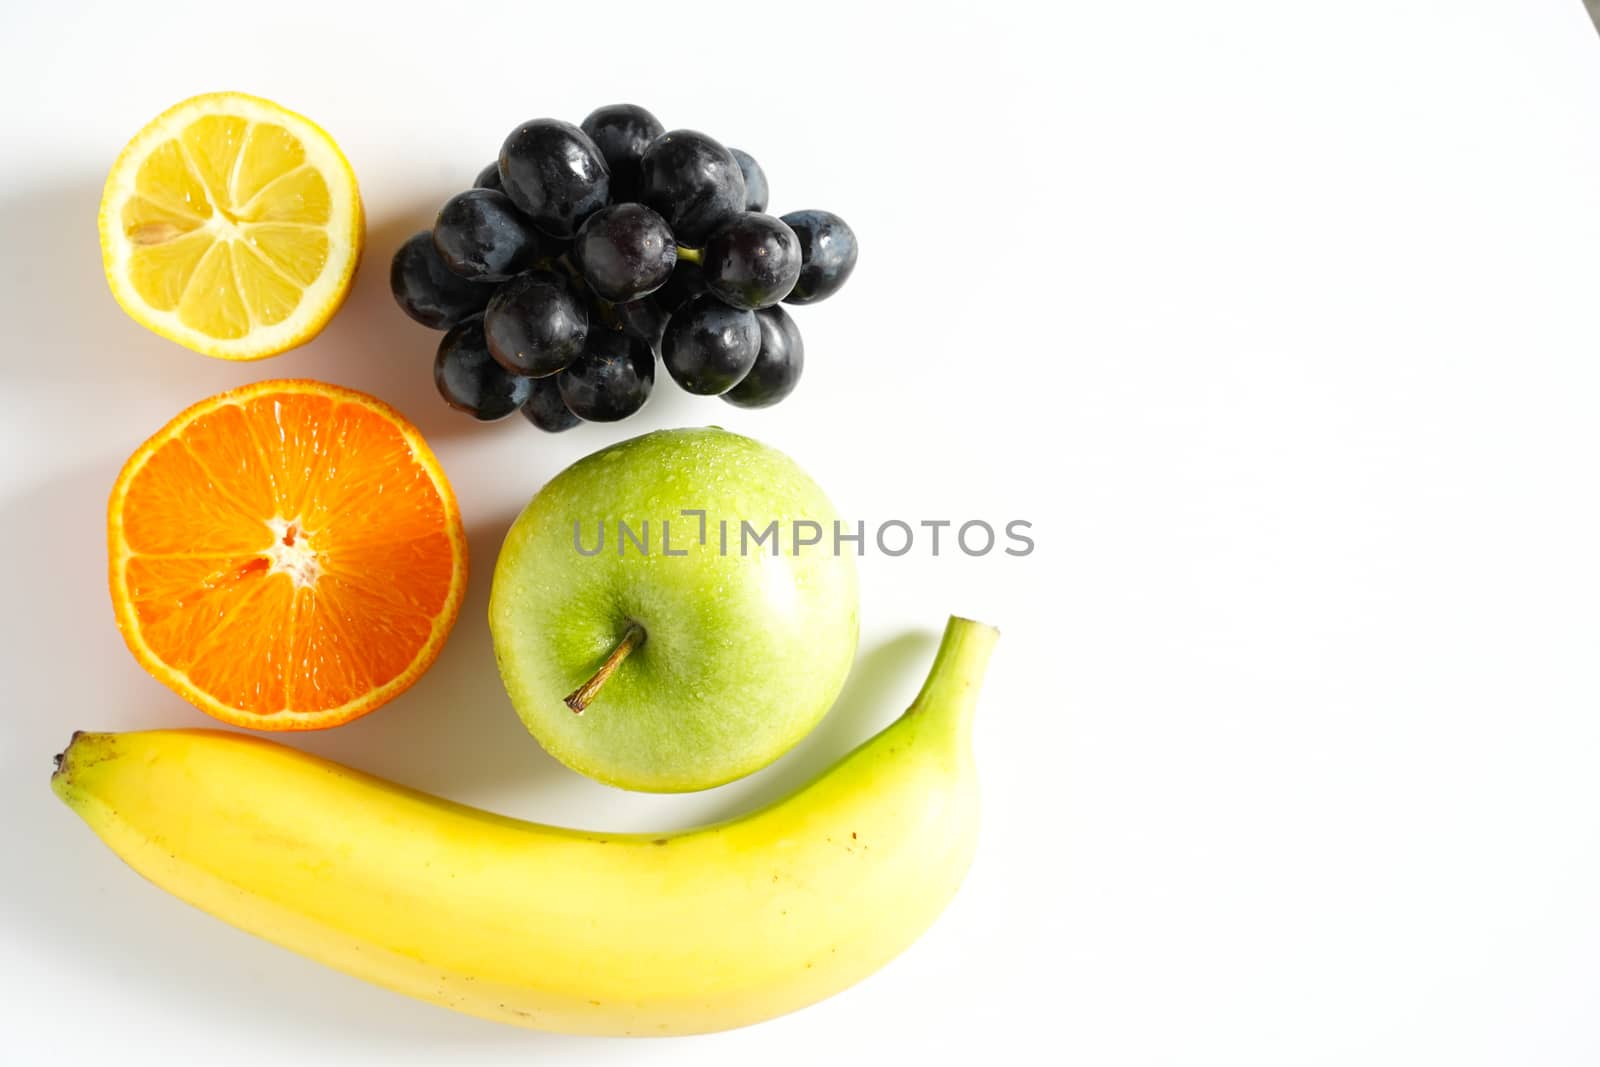 A Selection of Tropical Fruit by samULvisuals